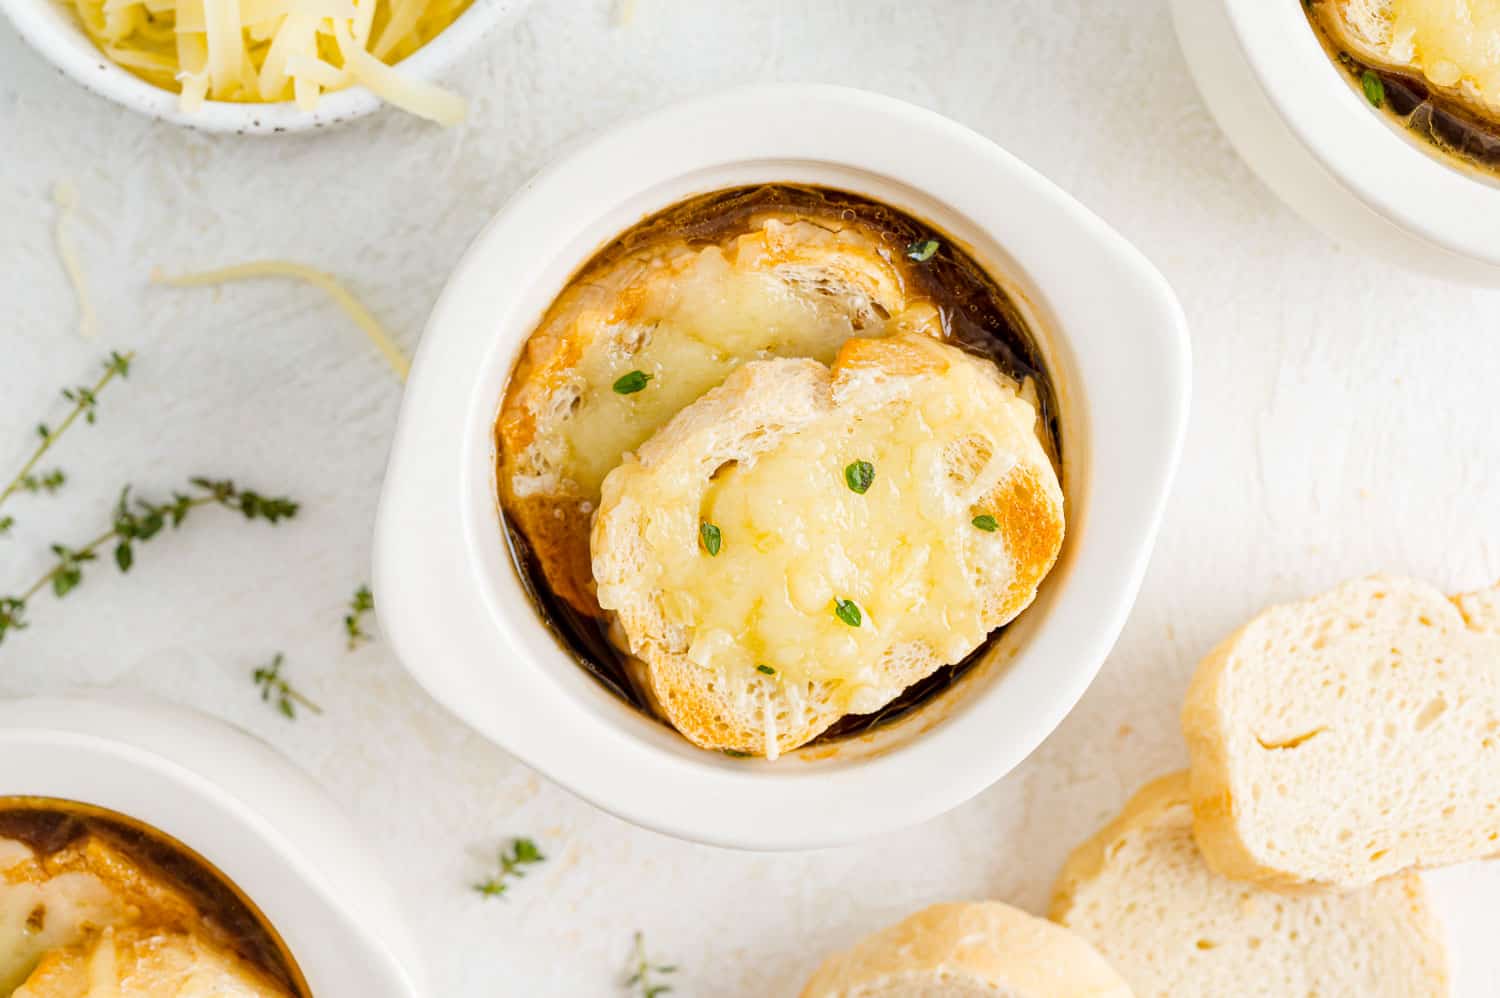 Onion soup with cheese toasts.